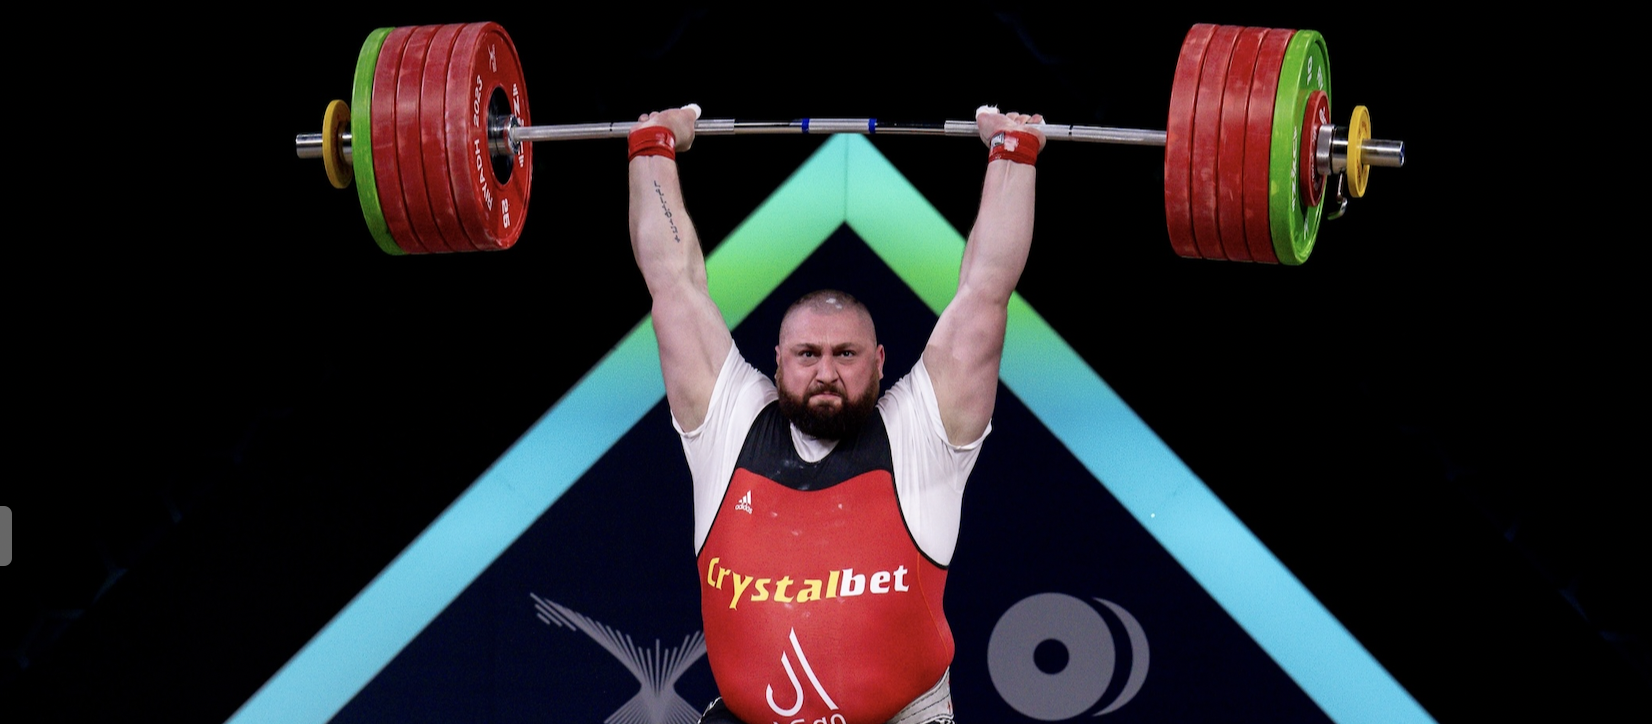 From a total entries of 719, 680 competed at the IWF World Championships in Riyadh ©IWF